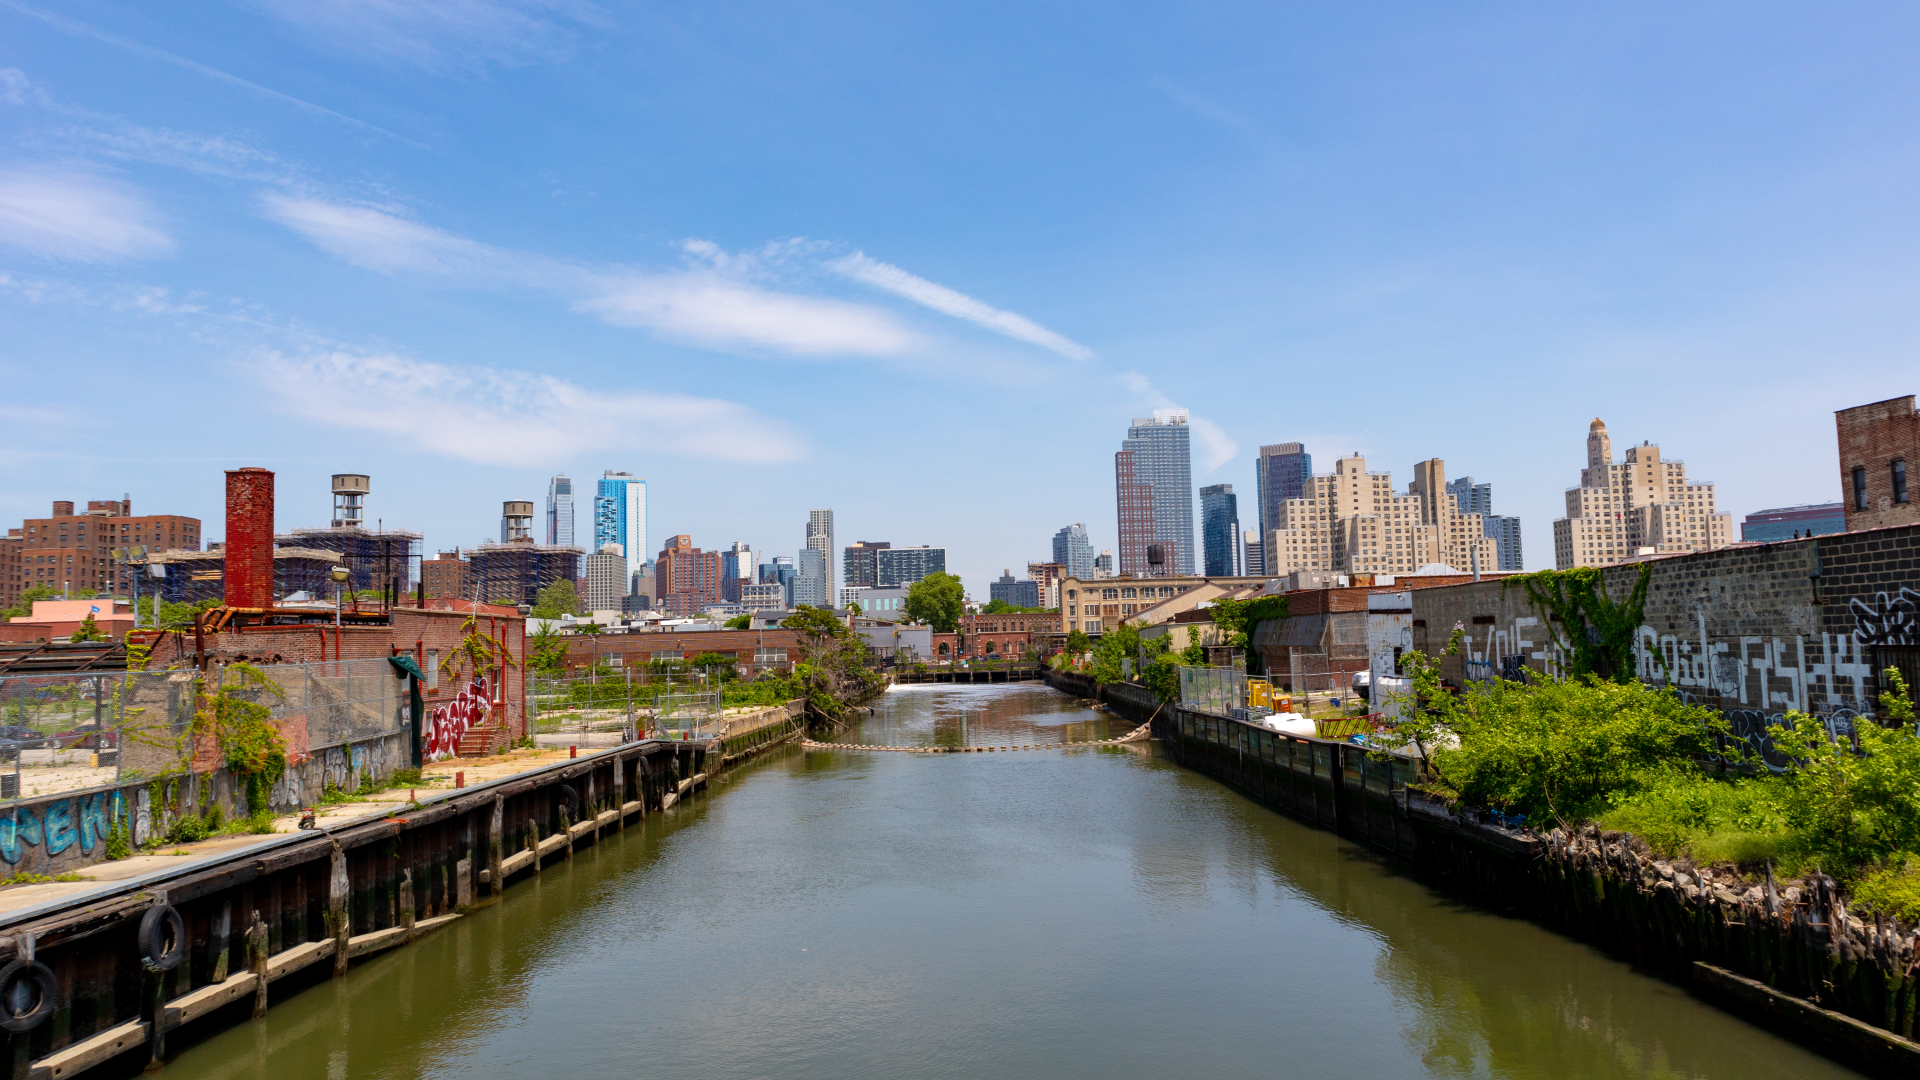 Air Monitoring at Remediation Sites – What I learned from a visit to Gowanus, NYC